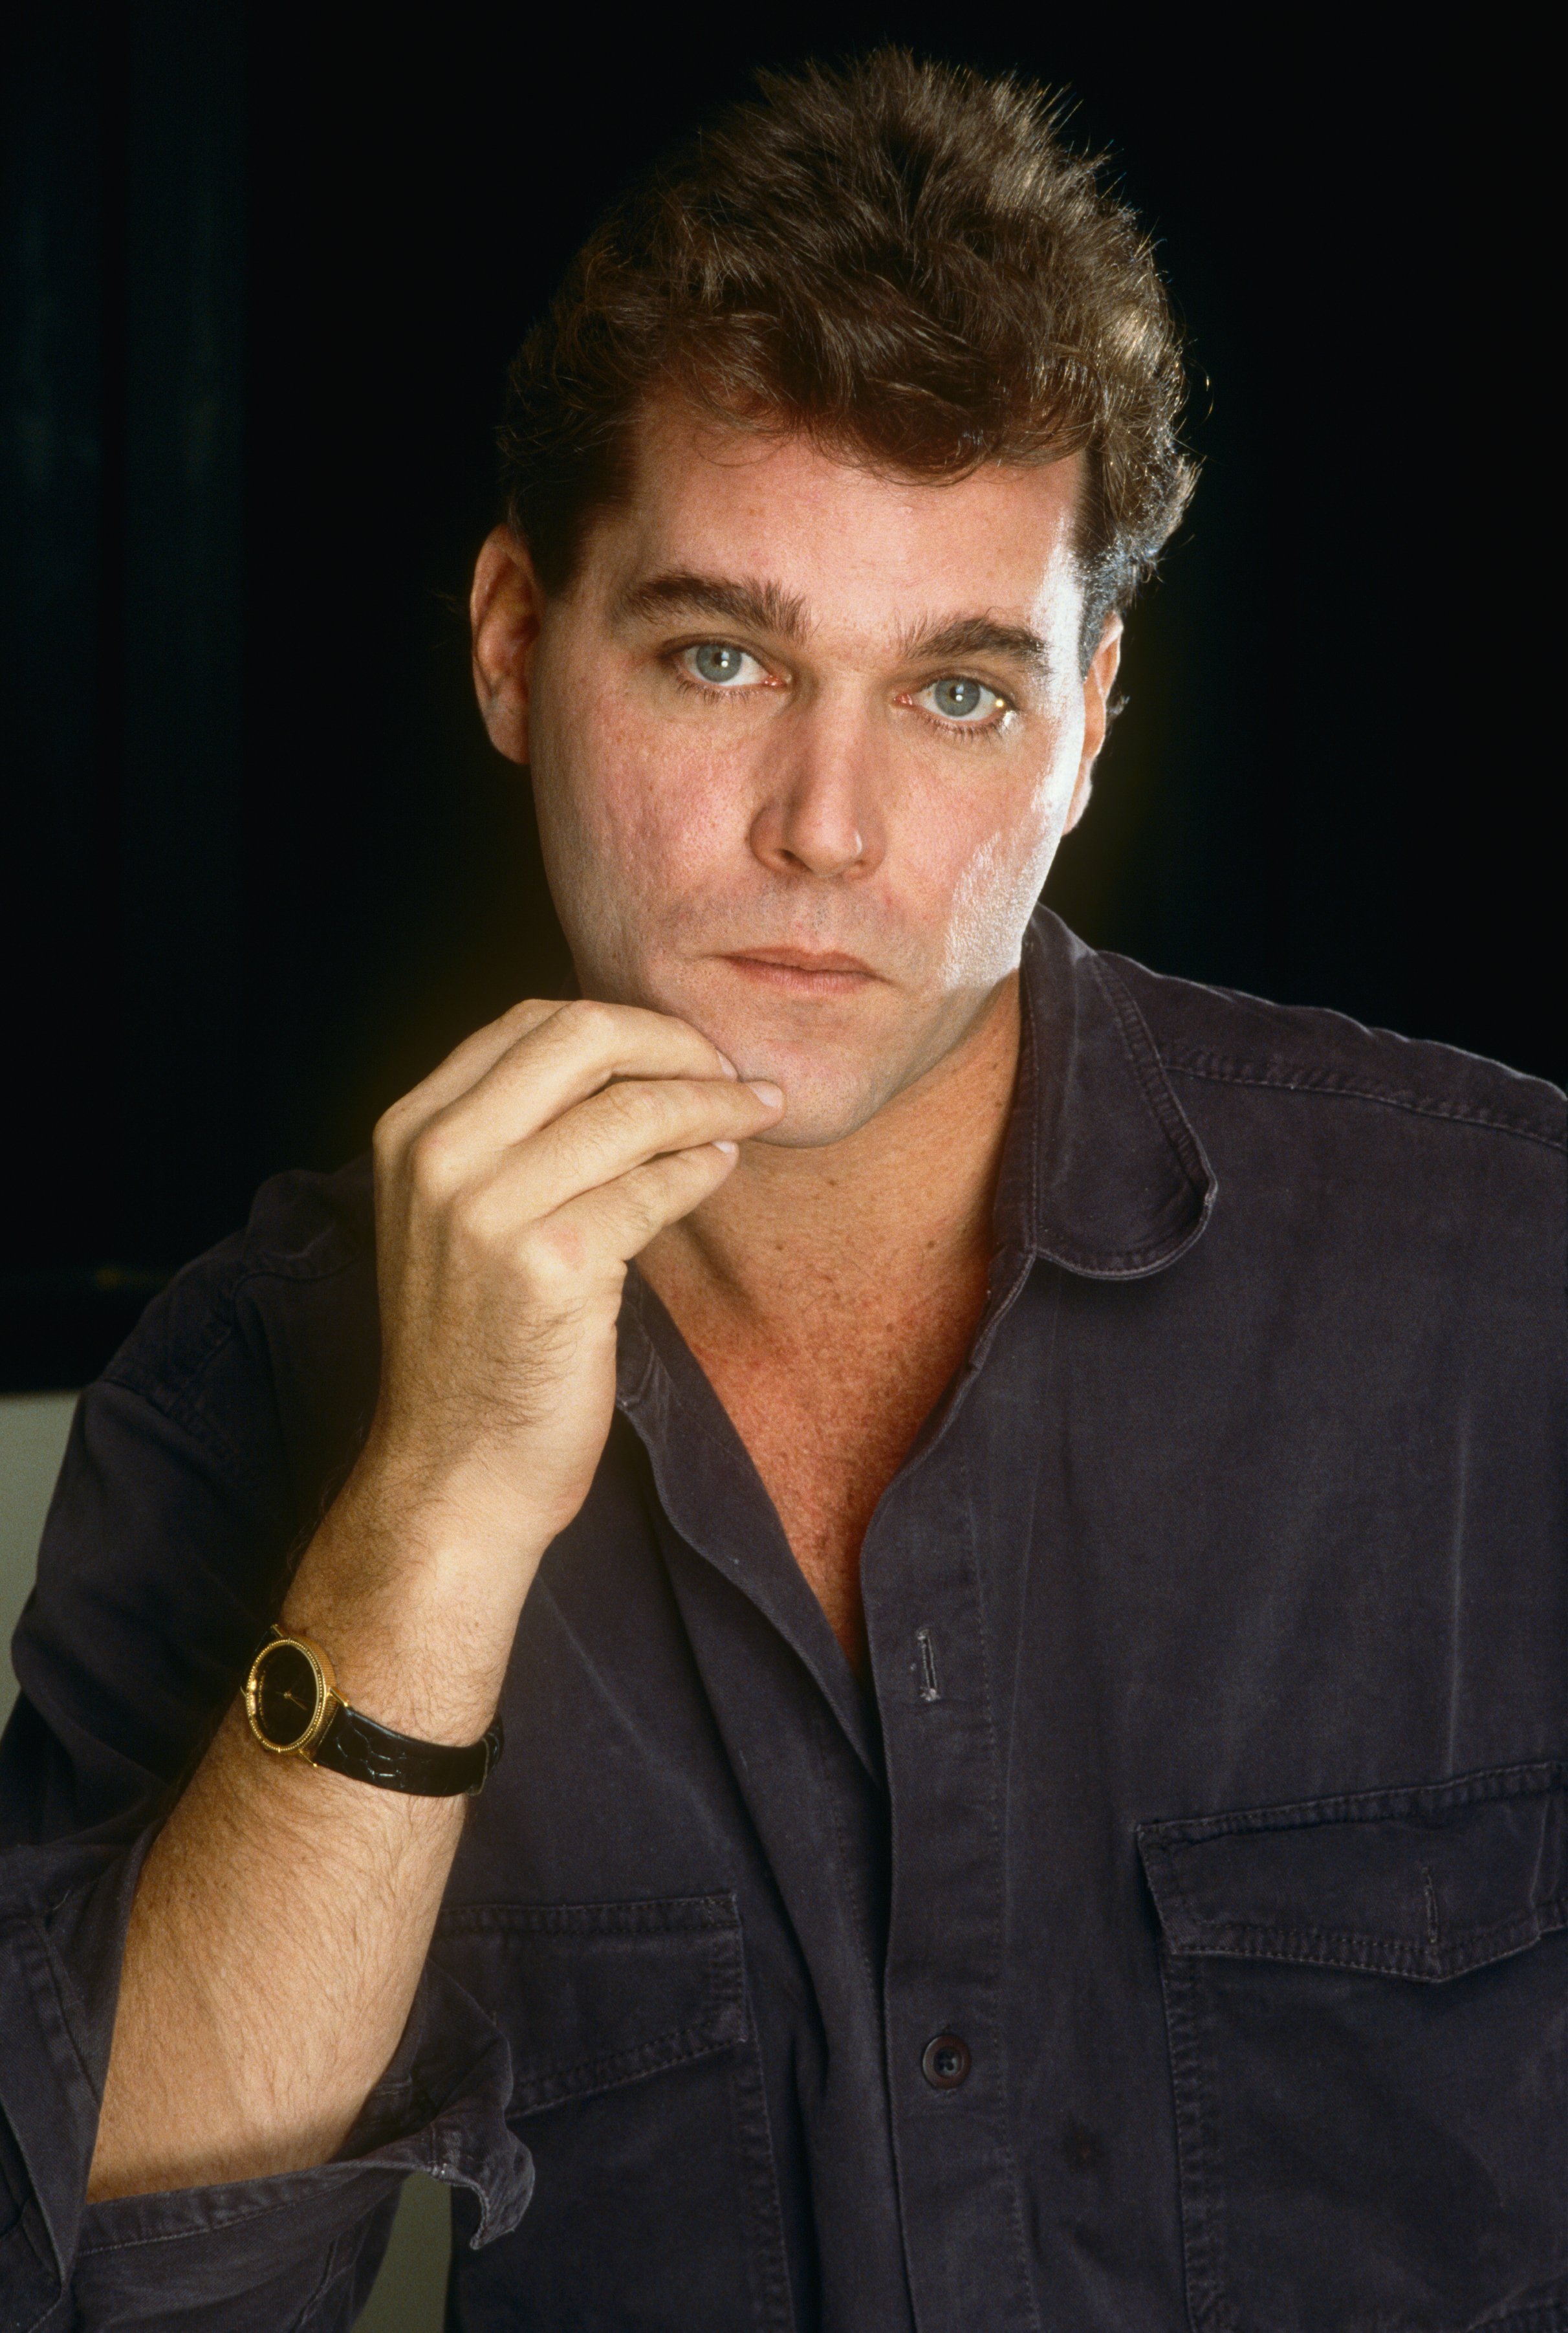 Ray Liotta, poses during a 1990 Los Angeles, California, photo portrait session. | Source: Getty Images